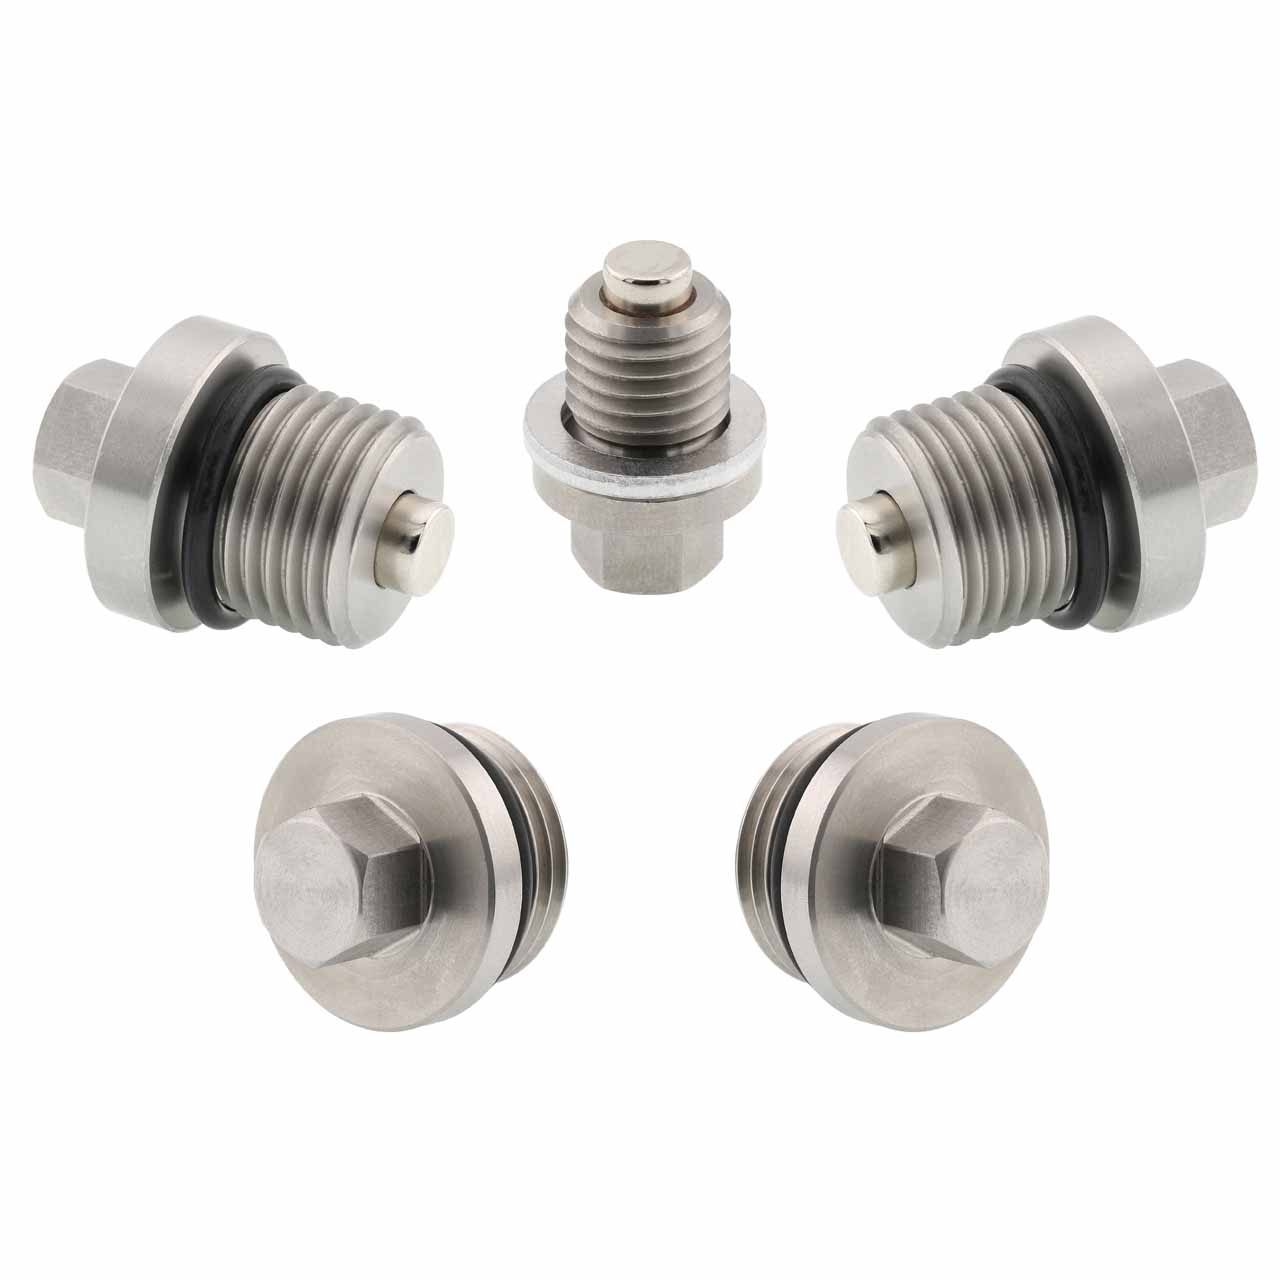 Polaris ACE 570 EPS Magnetic Oil Drain Plug Kit - 2018-2019 - Engine, Transmission, Differential - Made In USA